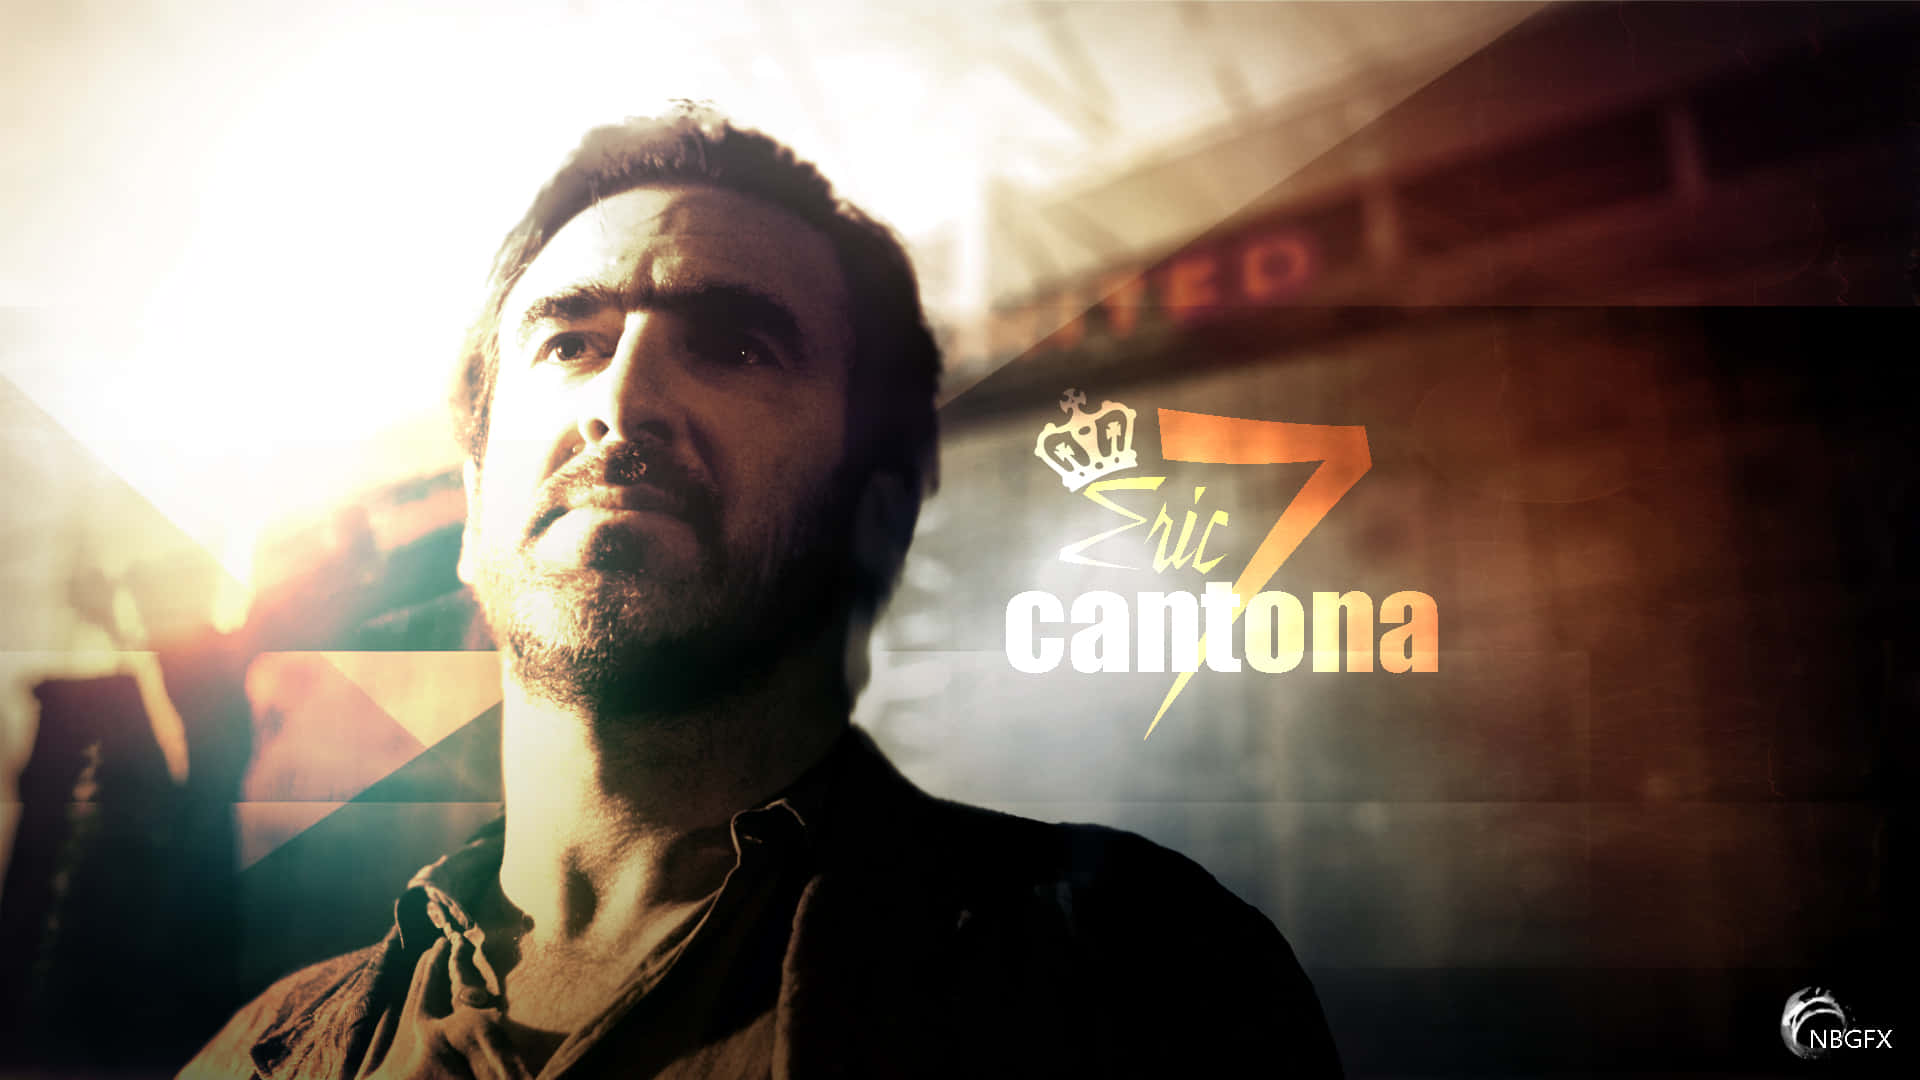 Ericcantona Crown Seven Can Be Translated To Italian As 